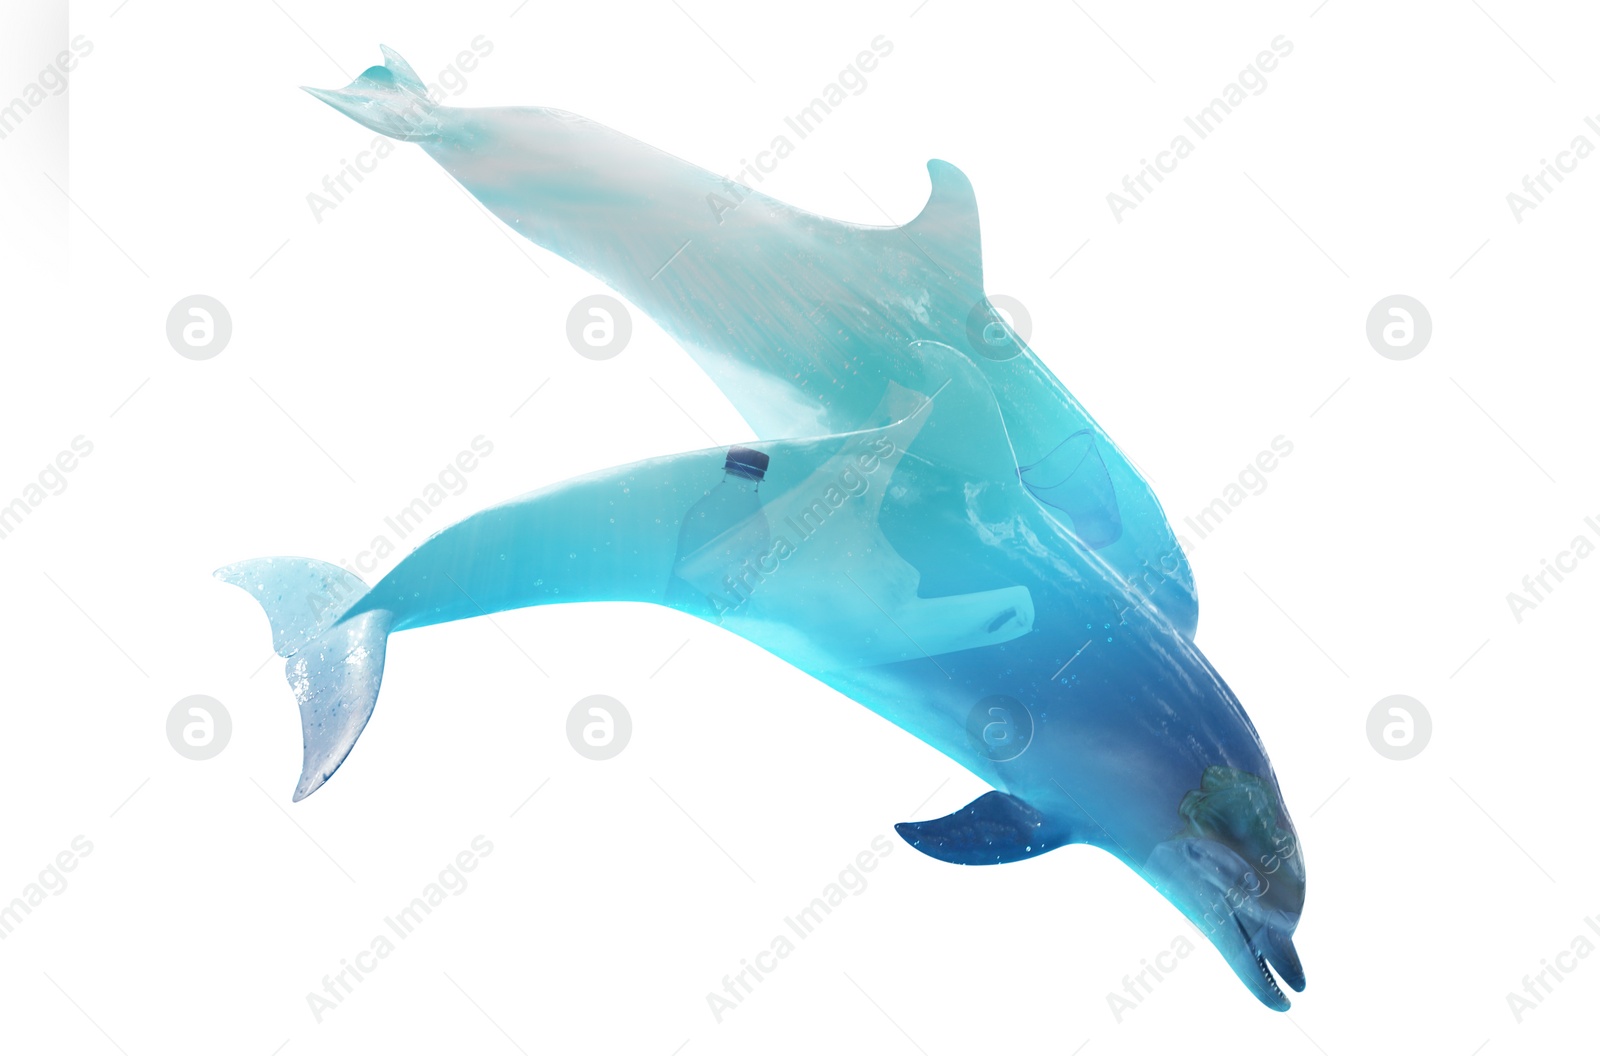 Image of Plastic garbage in ocean and dolphins, double exposure. Environmental pollution